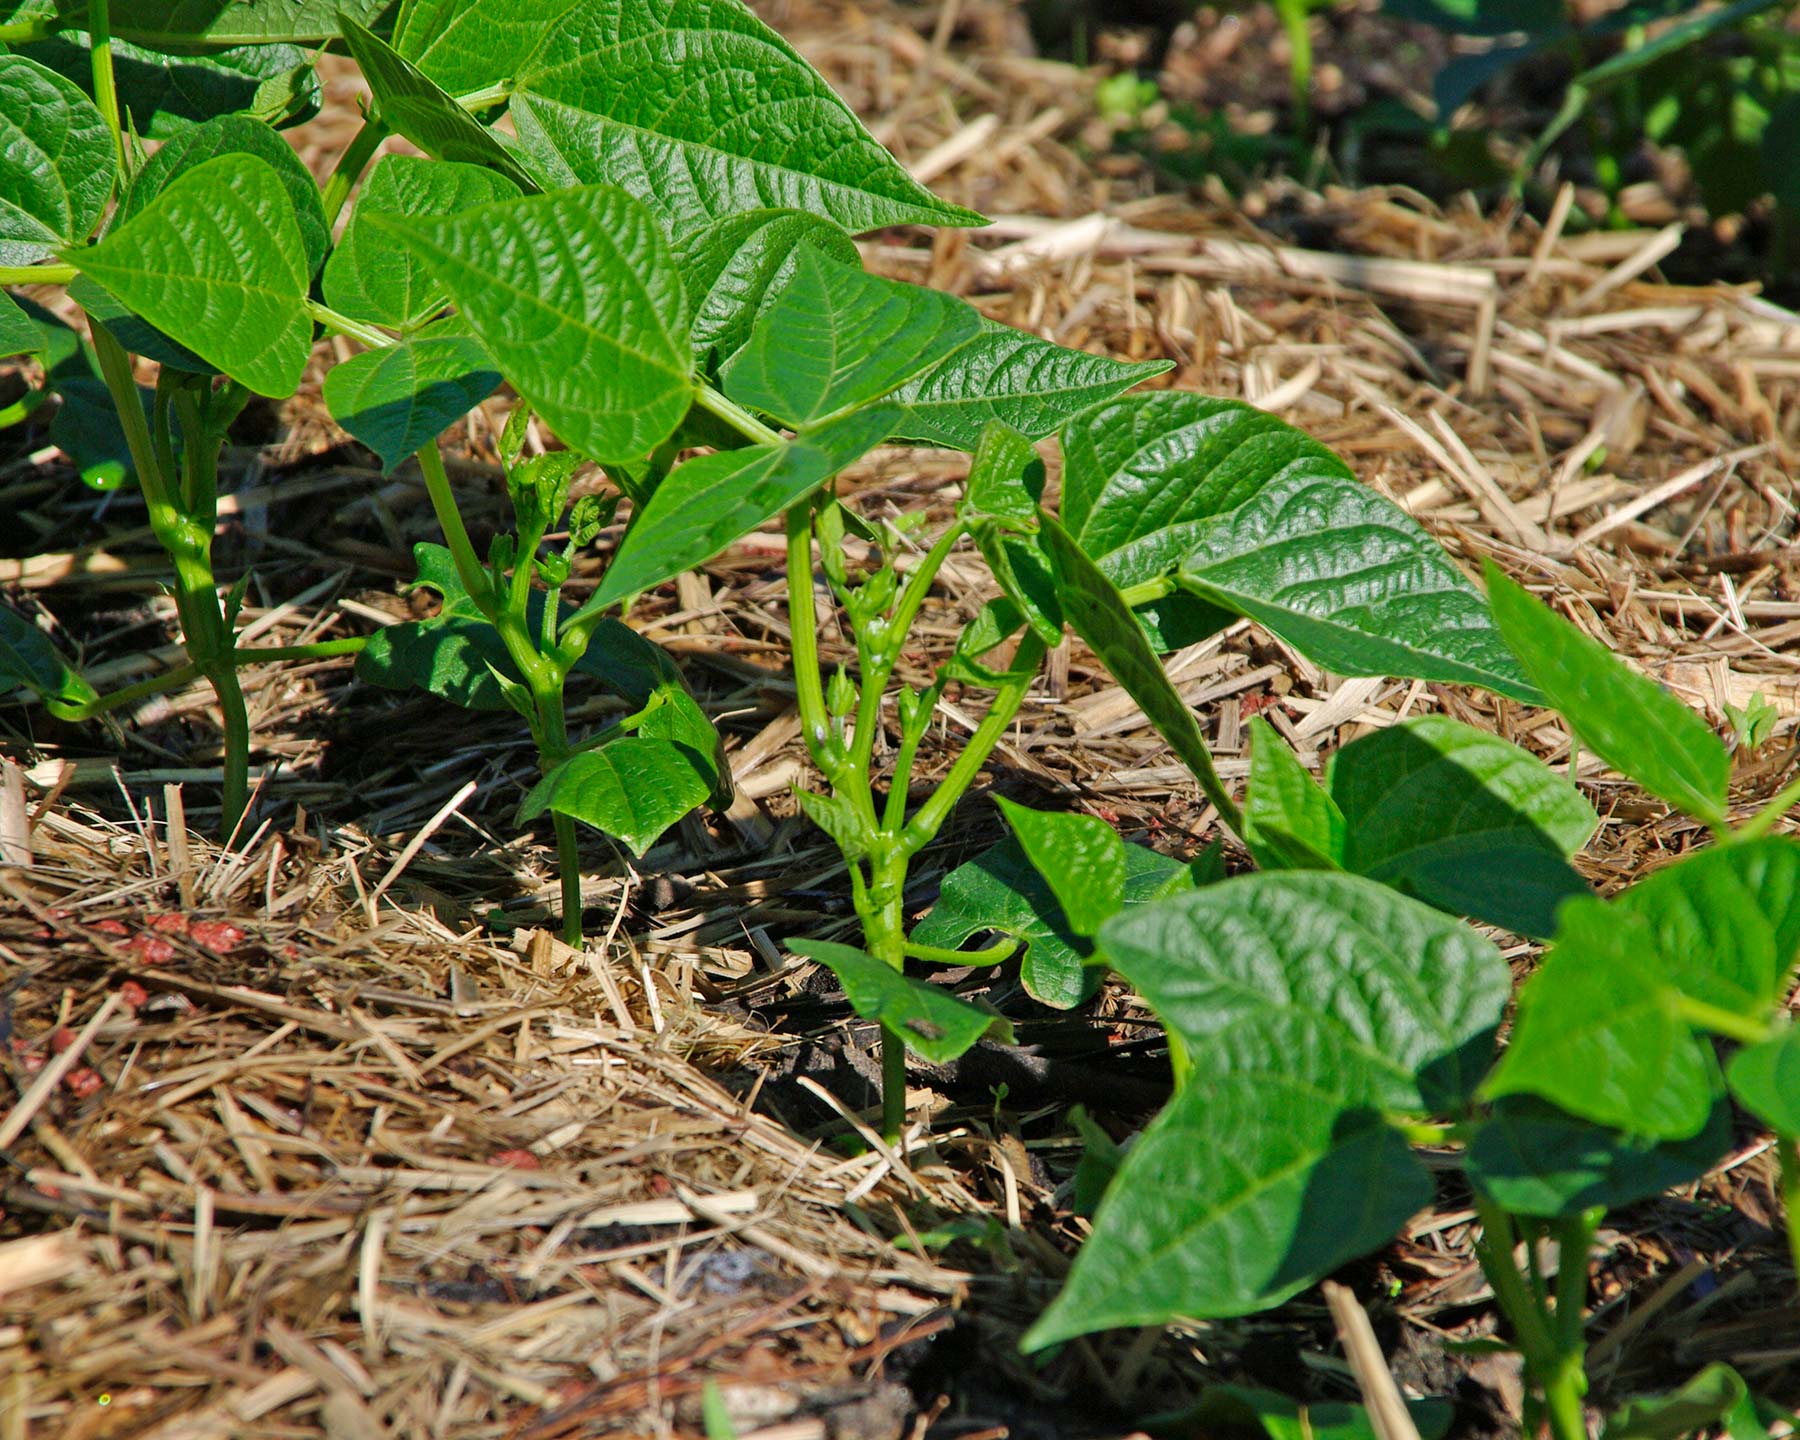 Phaseolus vulgaris - Dwarf french beans need no stakes to support.